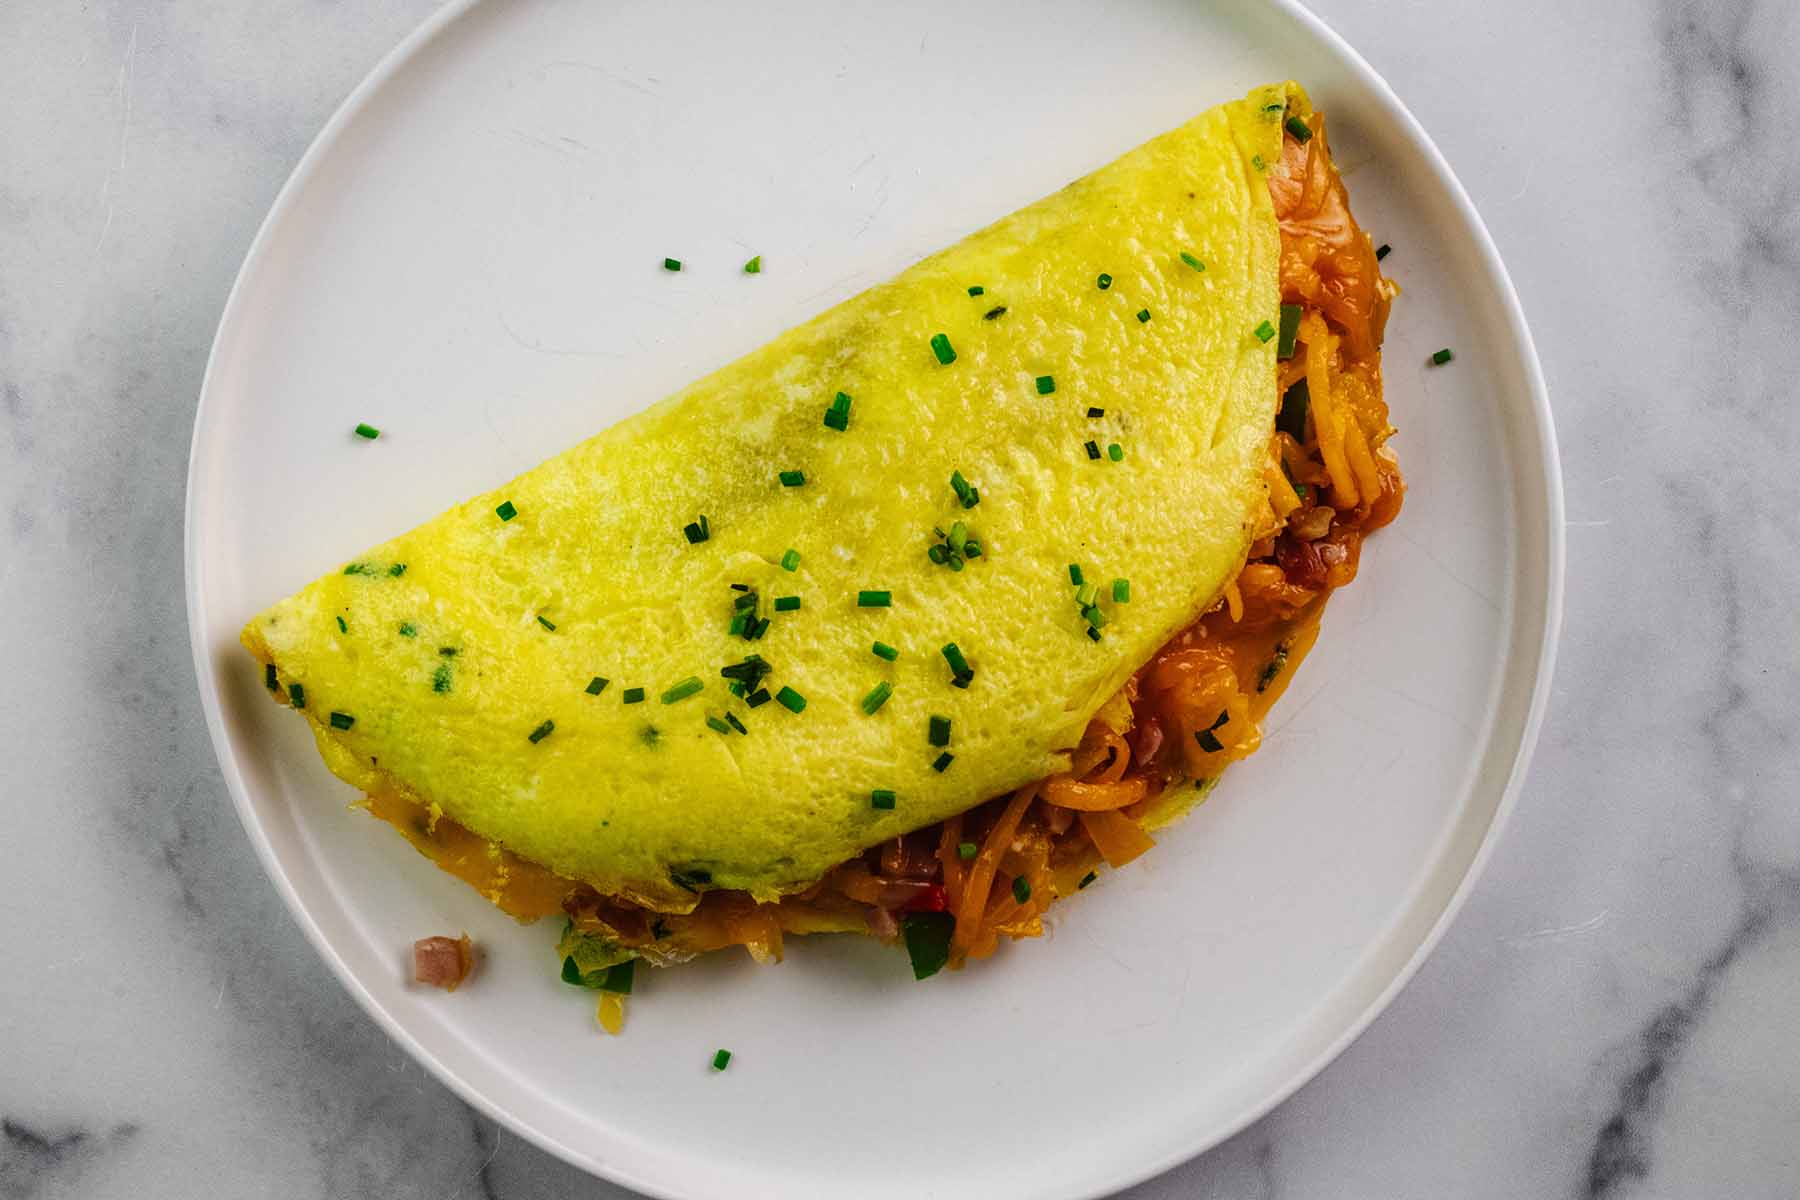 Western omelette folded over itself into a half moon shape and served on a white plate.